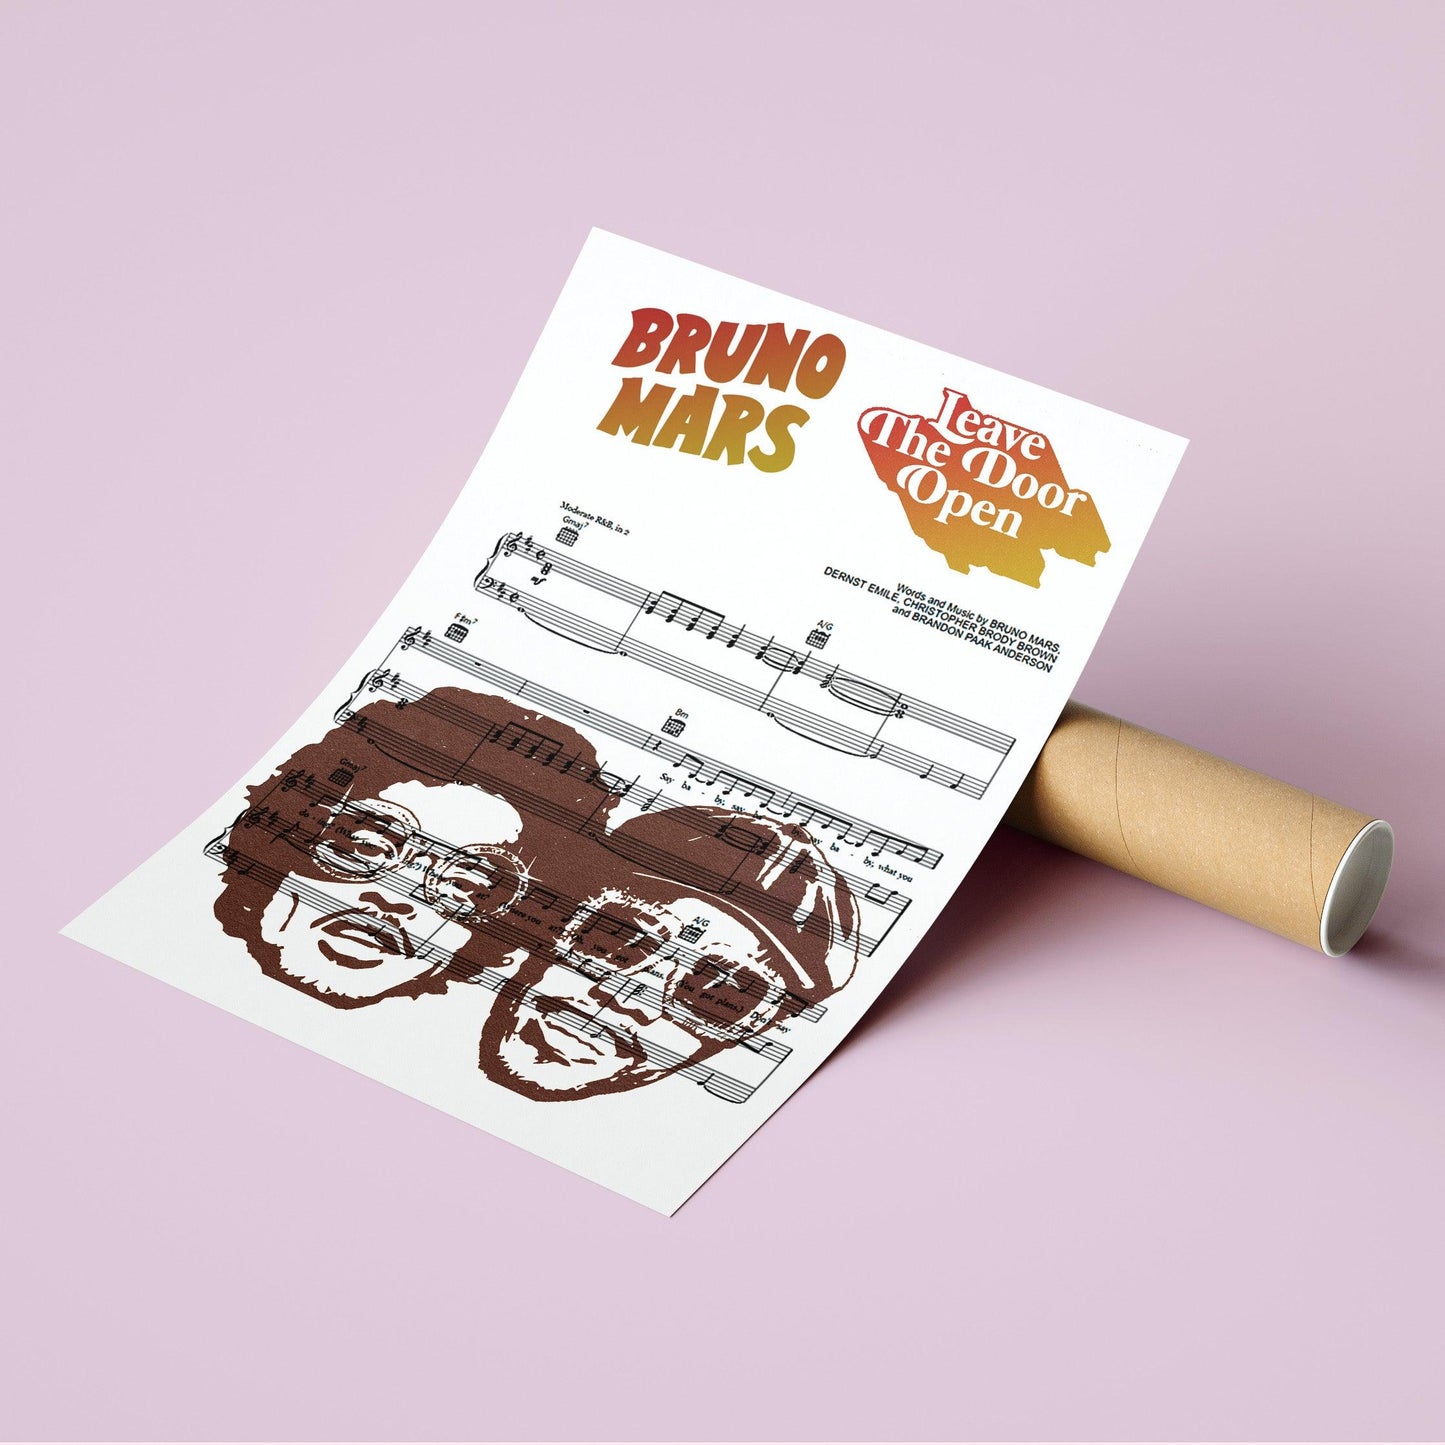 Bruno Mars, Anderson .Paak, Silk Sonic - Leave the Door Open Print | Song Music Sheet Notes Print Everyone has a favorite song especially Bruno Mars Poster, and now you can show the score as printed staff. The personal favorite song sheet print shows the song chosen as the score. 